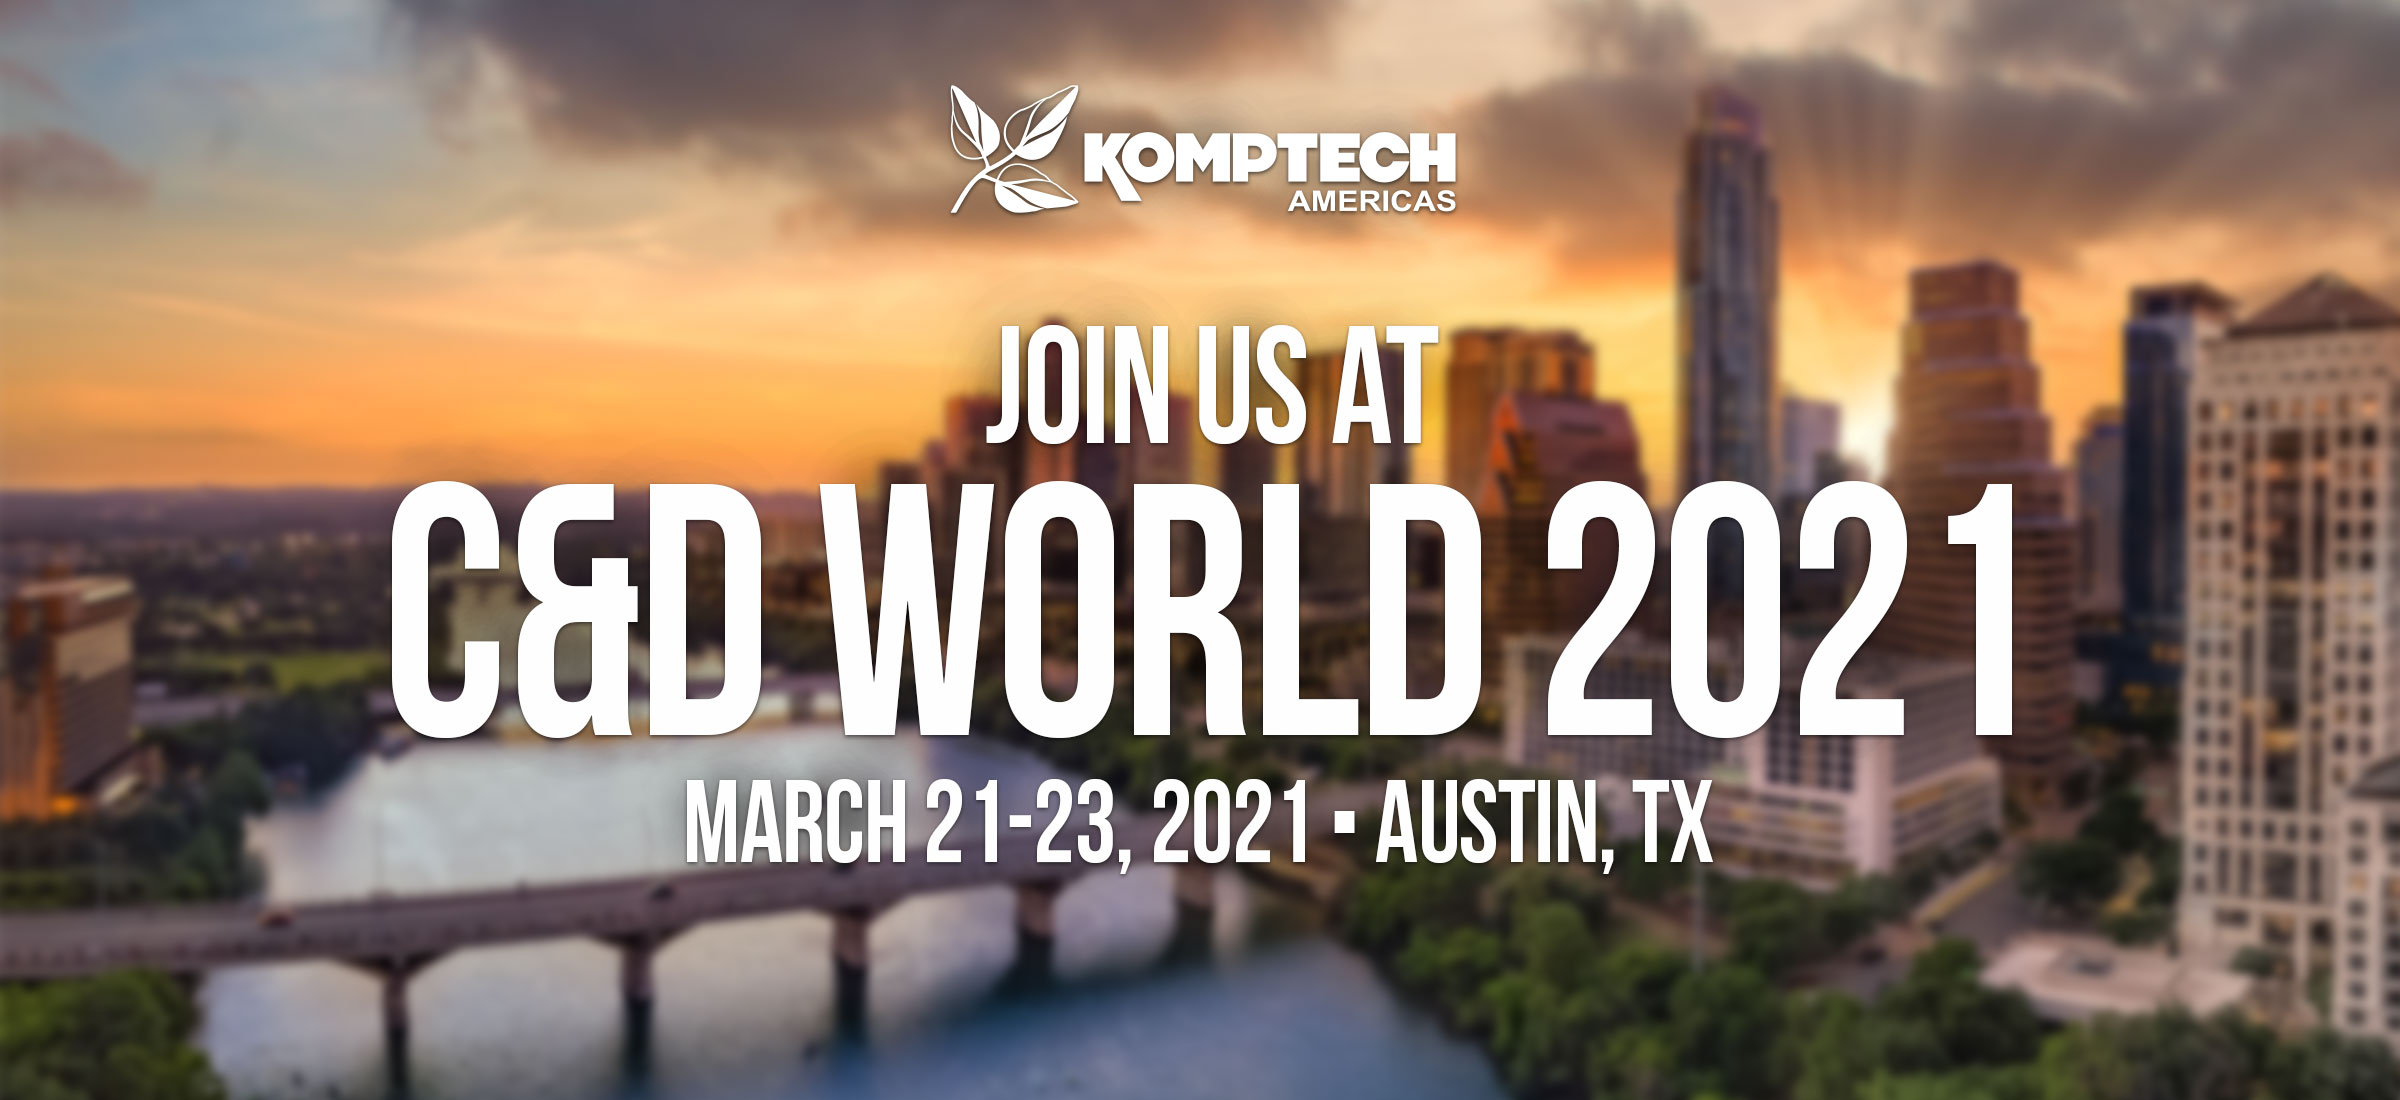 Join Us At C&D World 2021 - March 21-23, 2021 - Austin, TX